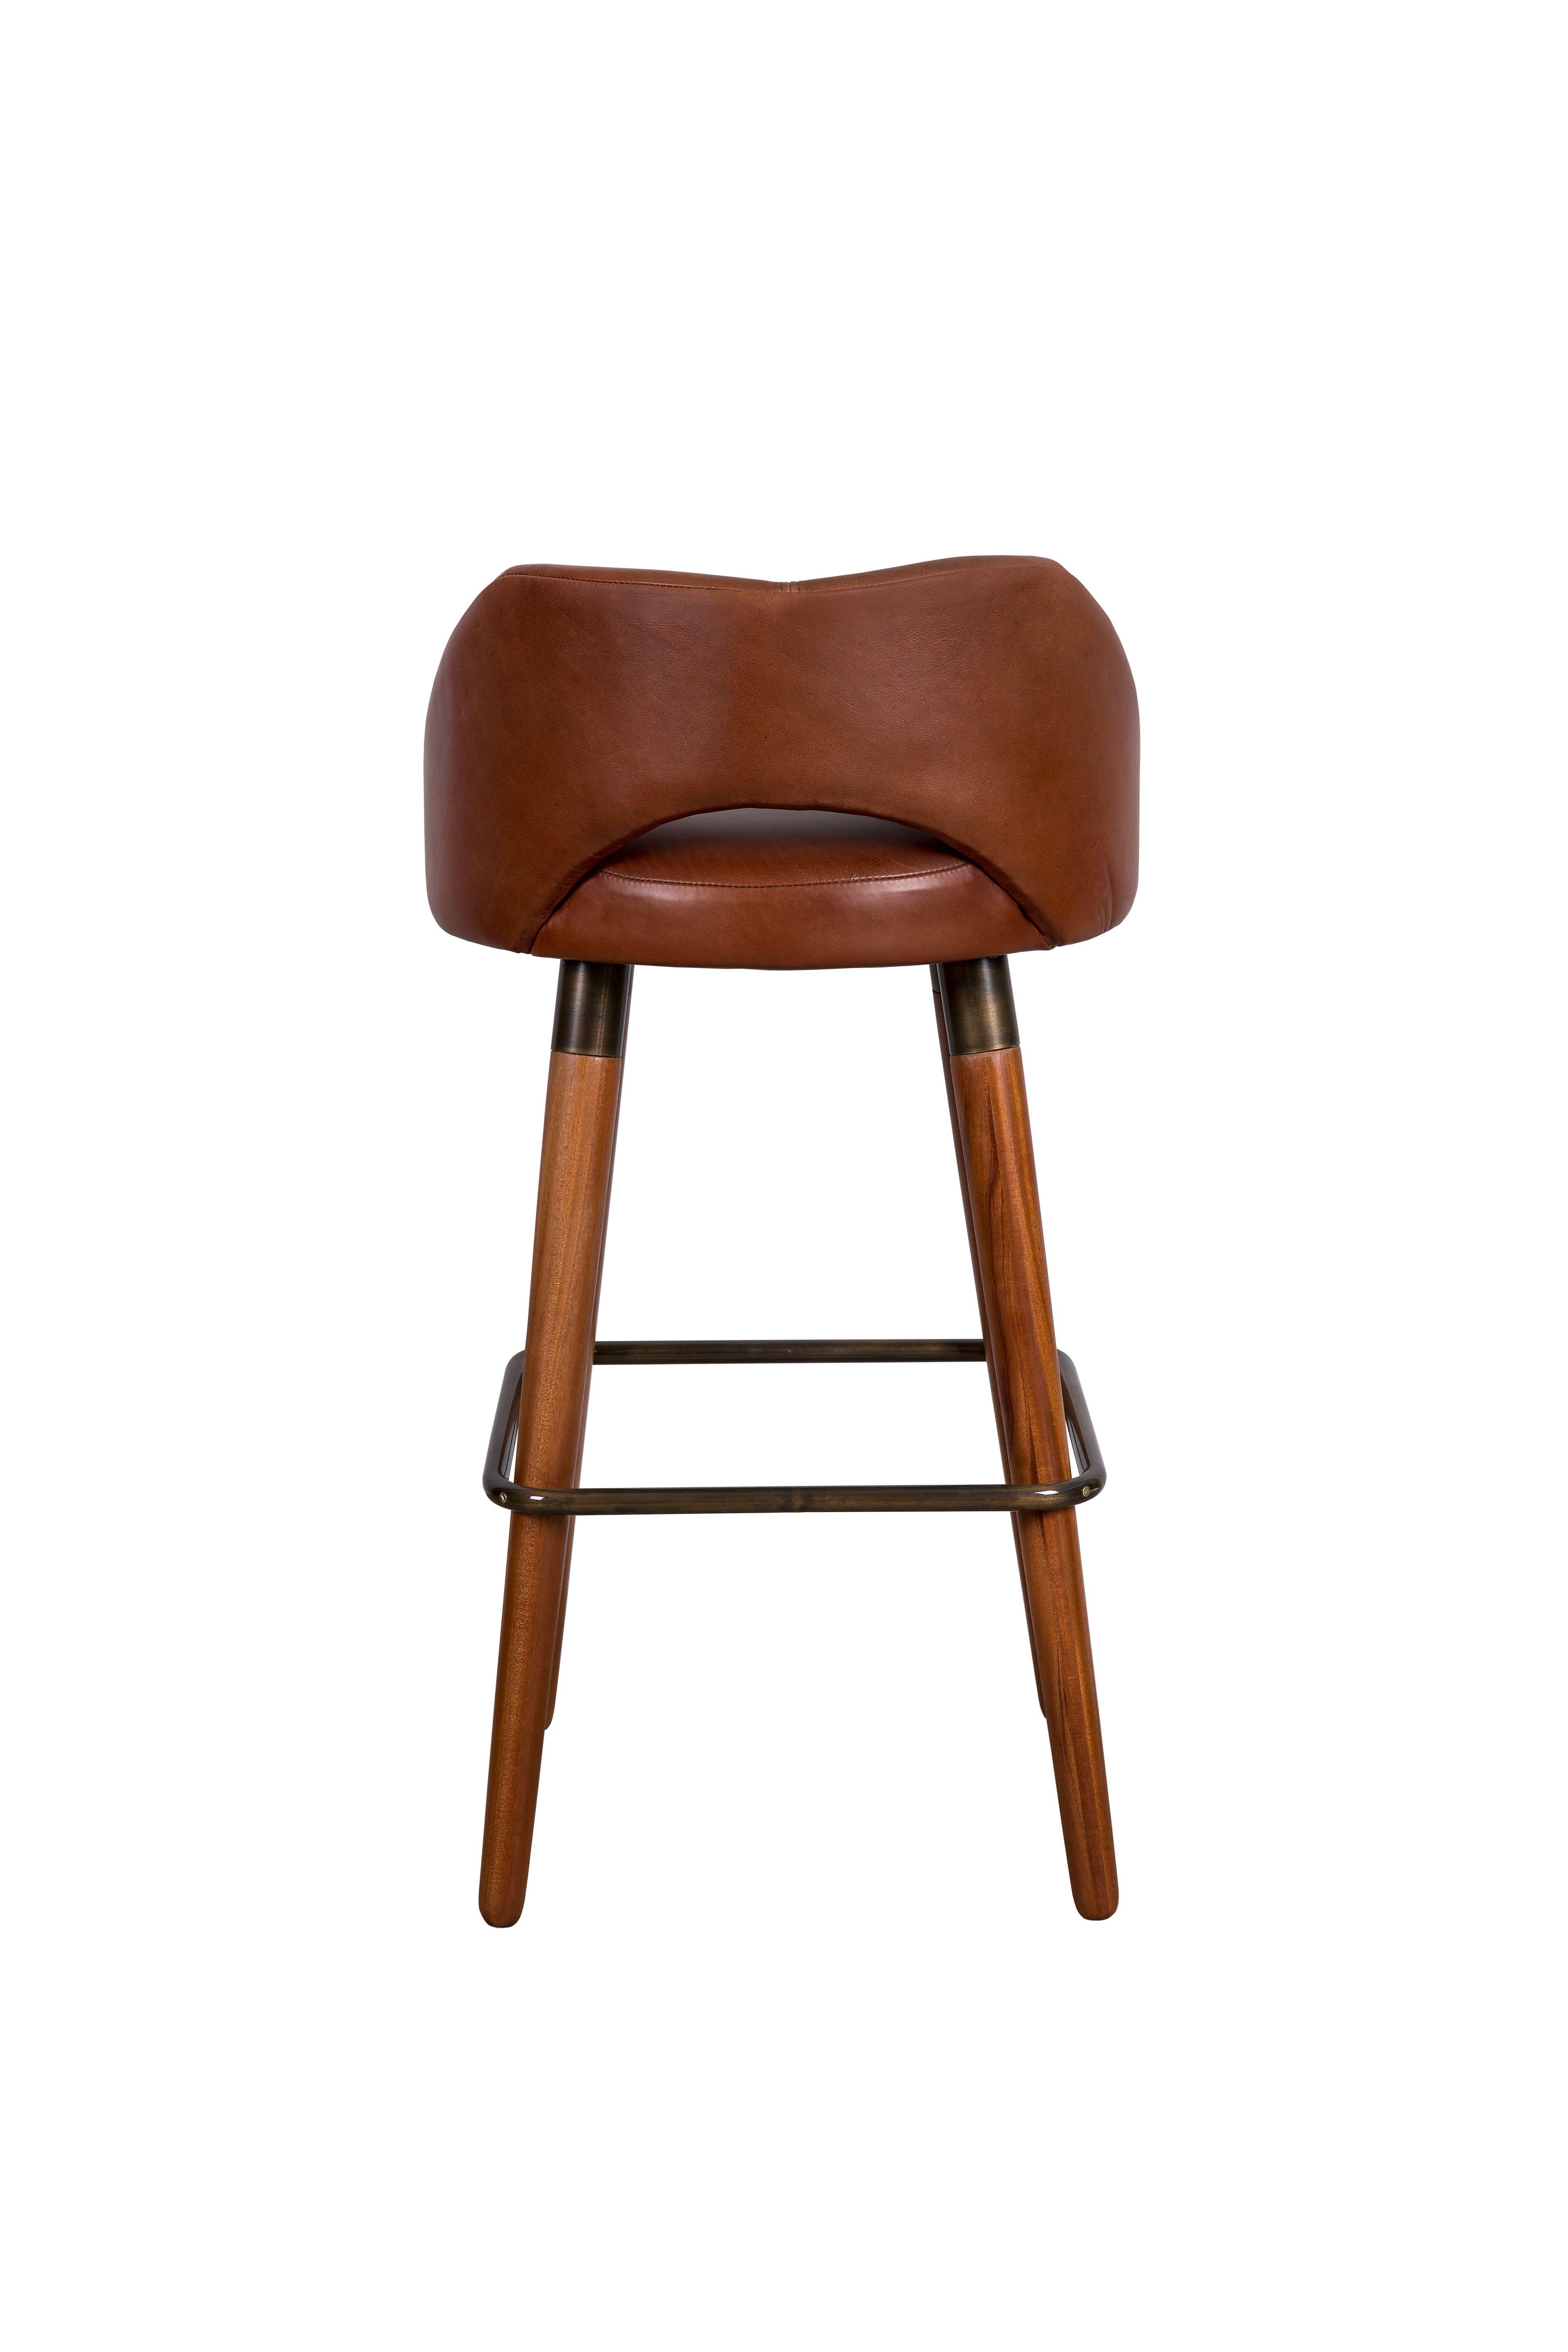 Plantation Bar Stool by Egg Designs
Dimensions: 50 L X 50 D X 98 H cm
Materials: Bronze Coated Steel, African Mahogany, Leather Upholstery

Founded by South Africans and life partners, Greg and Roche Dry - Egg is a unique perspective in